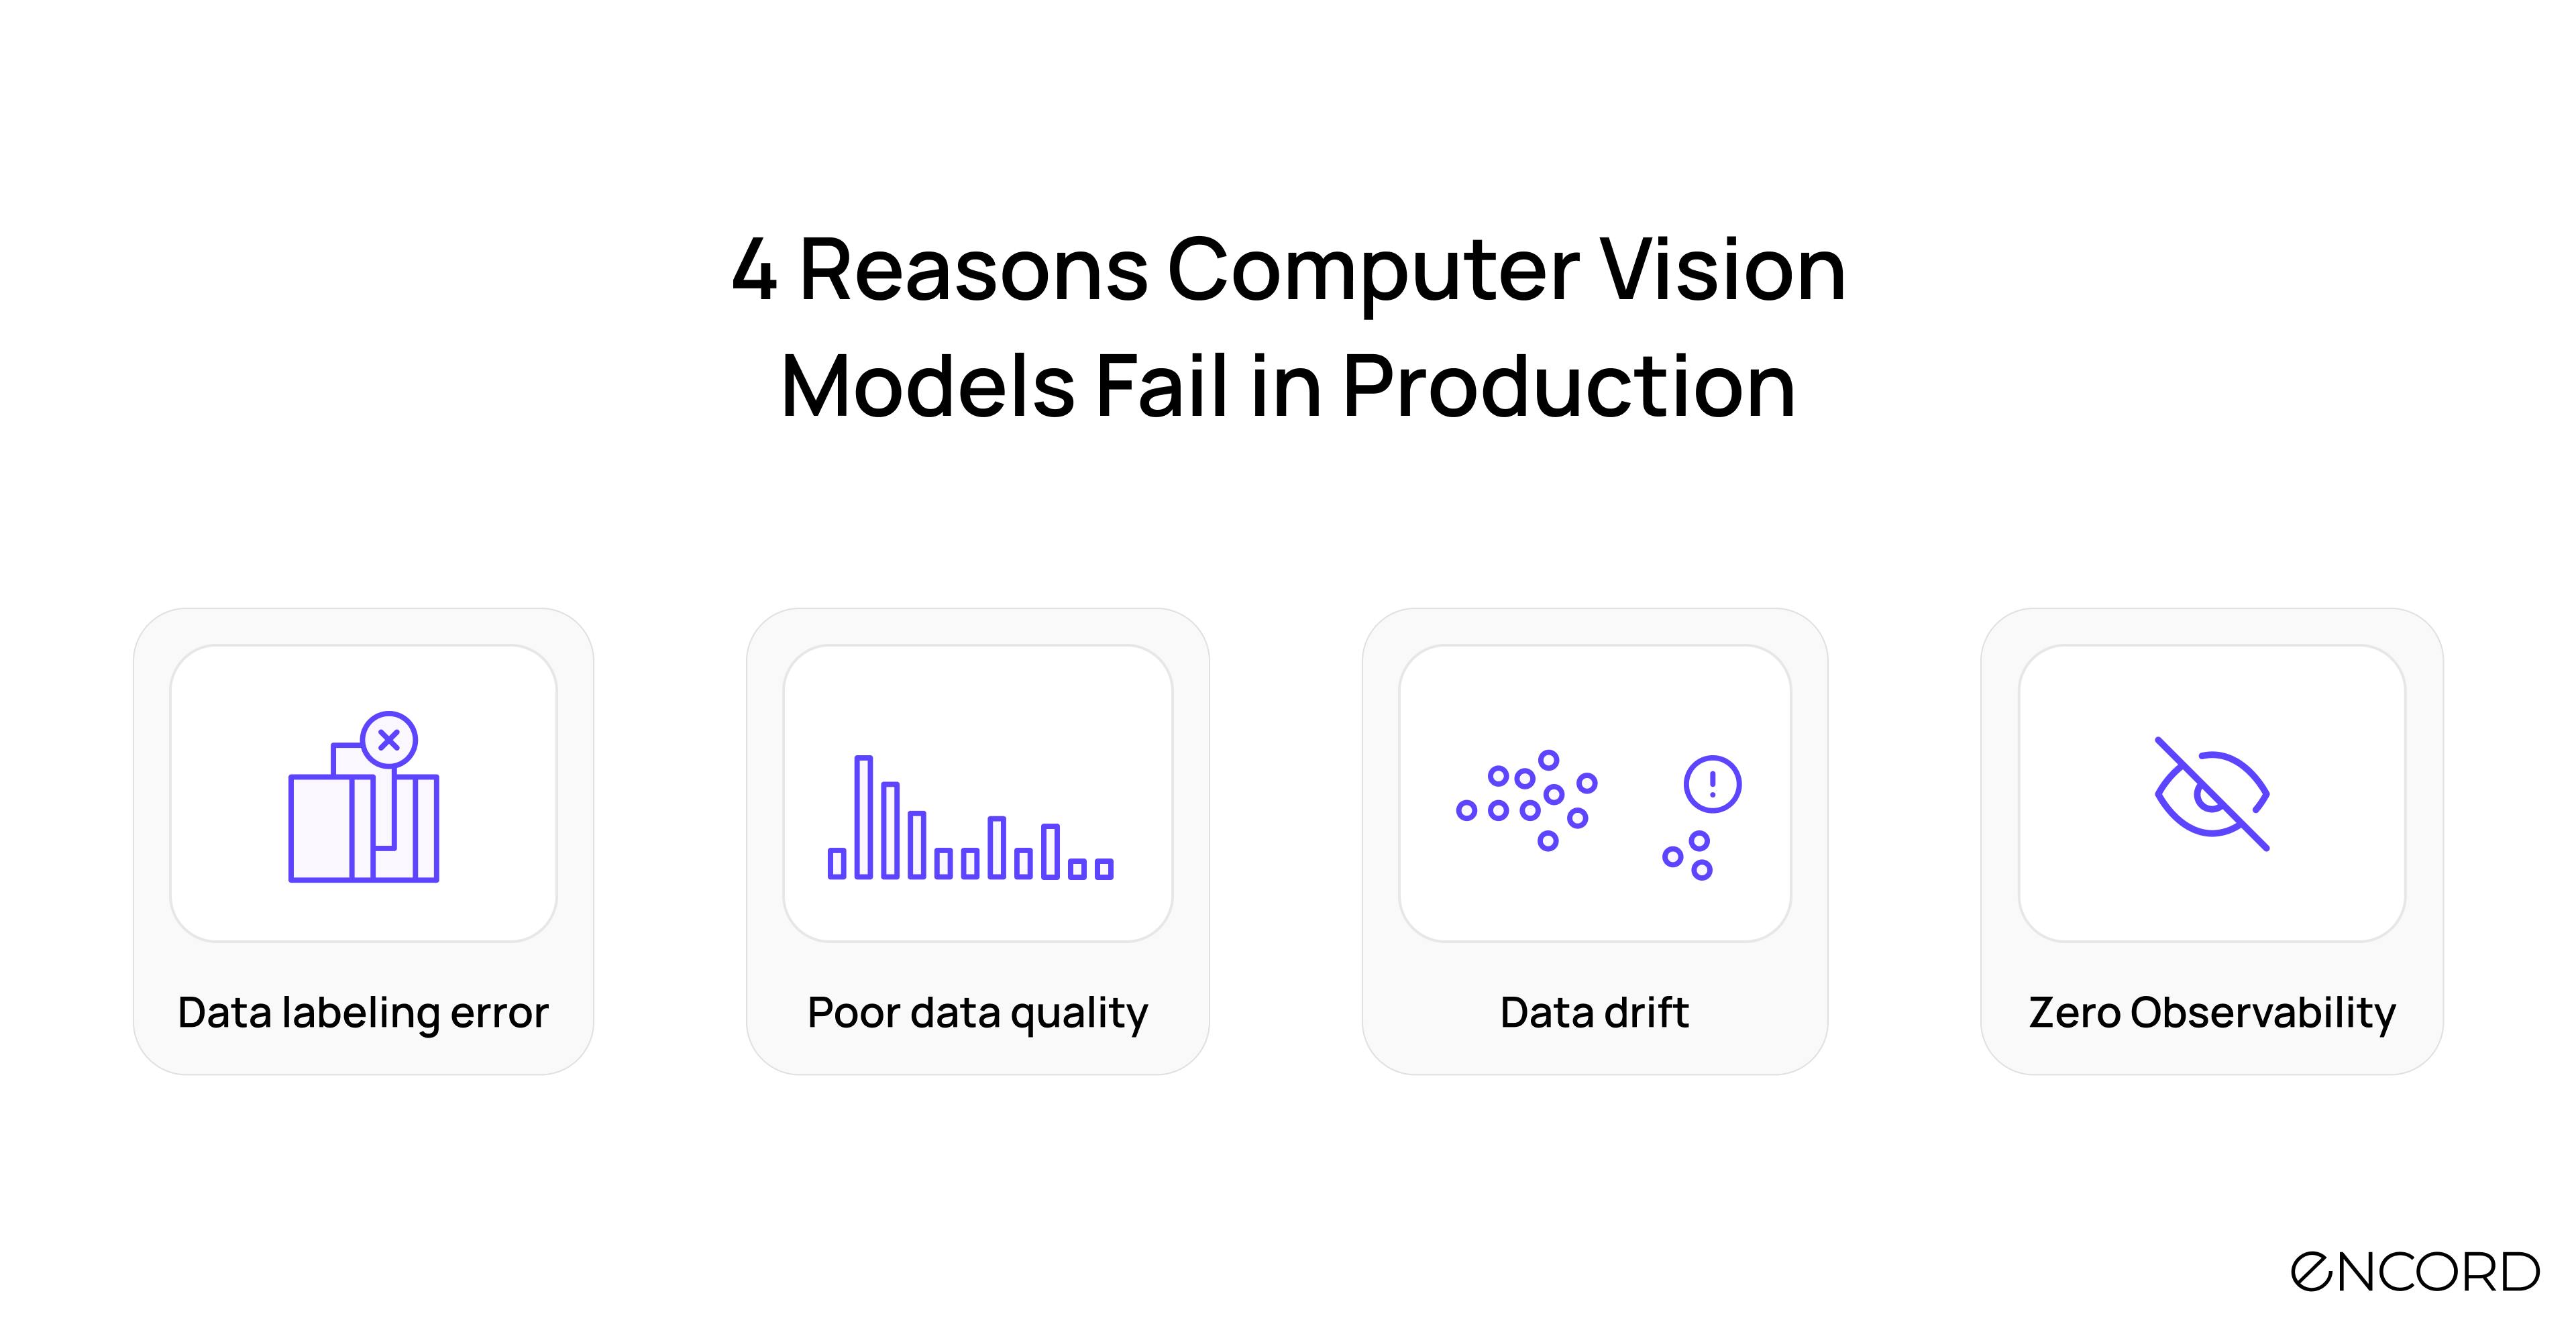 4 reasons your computer vision models fail in production.